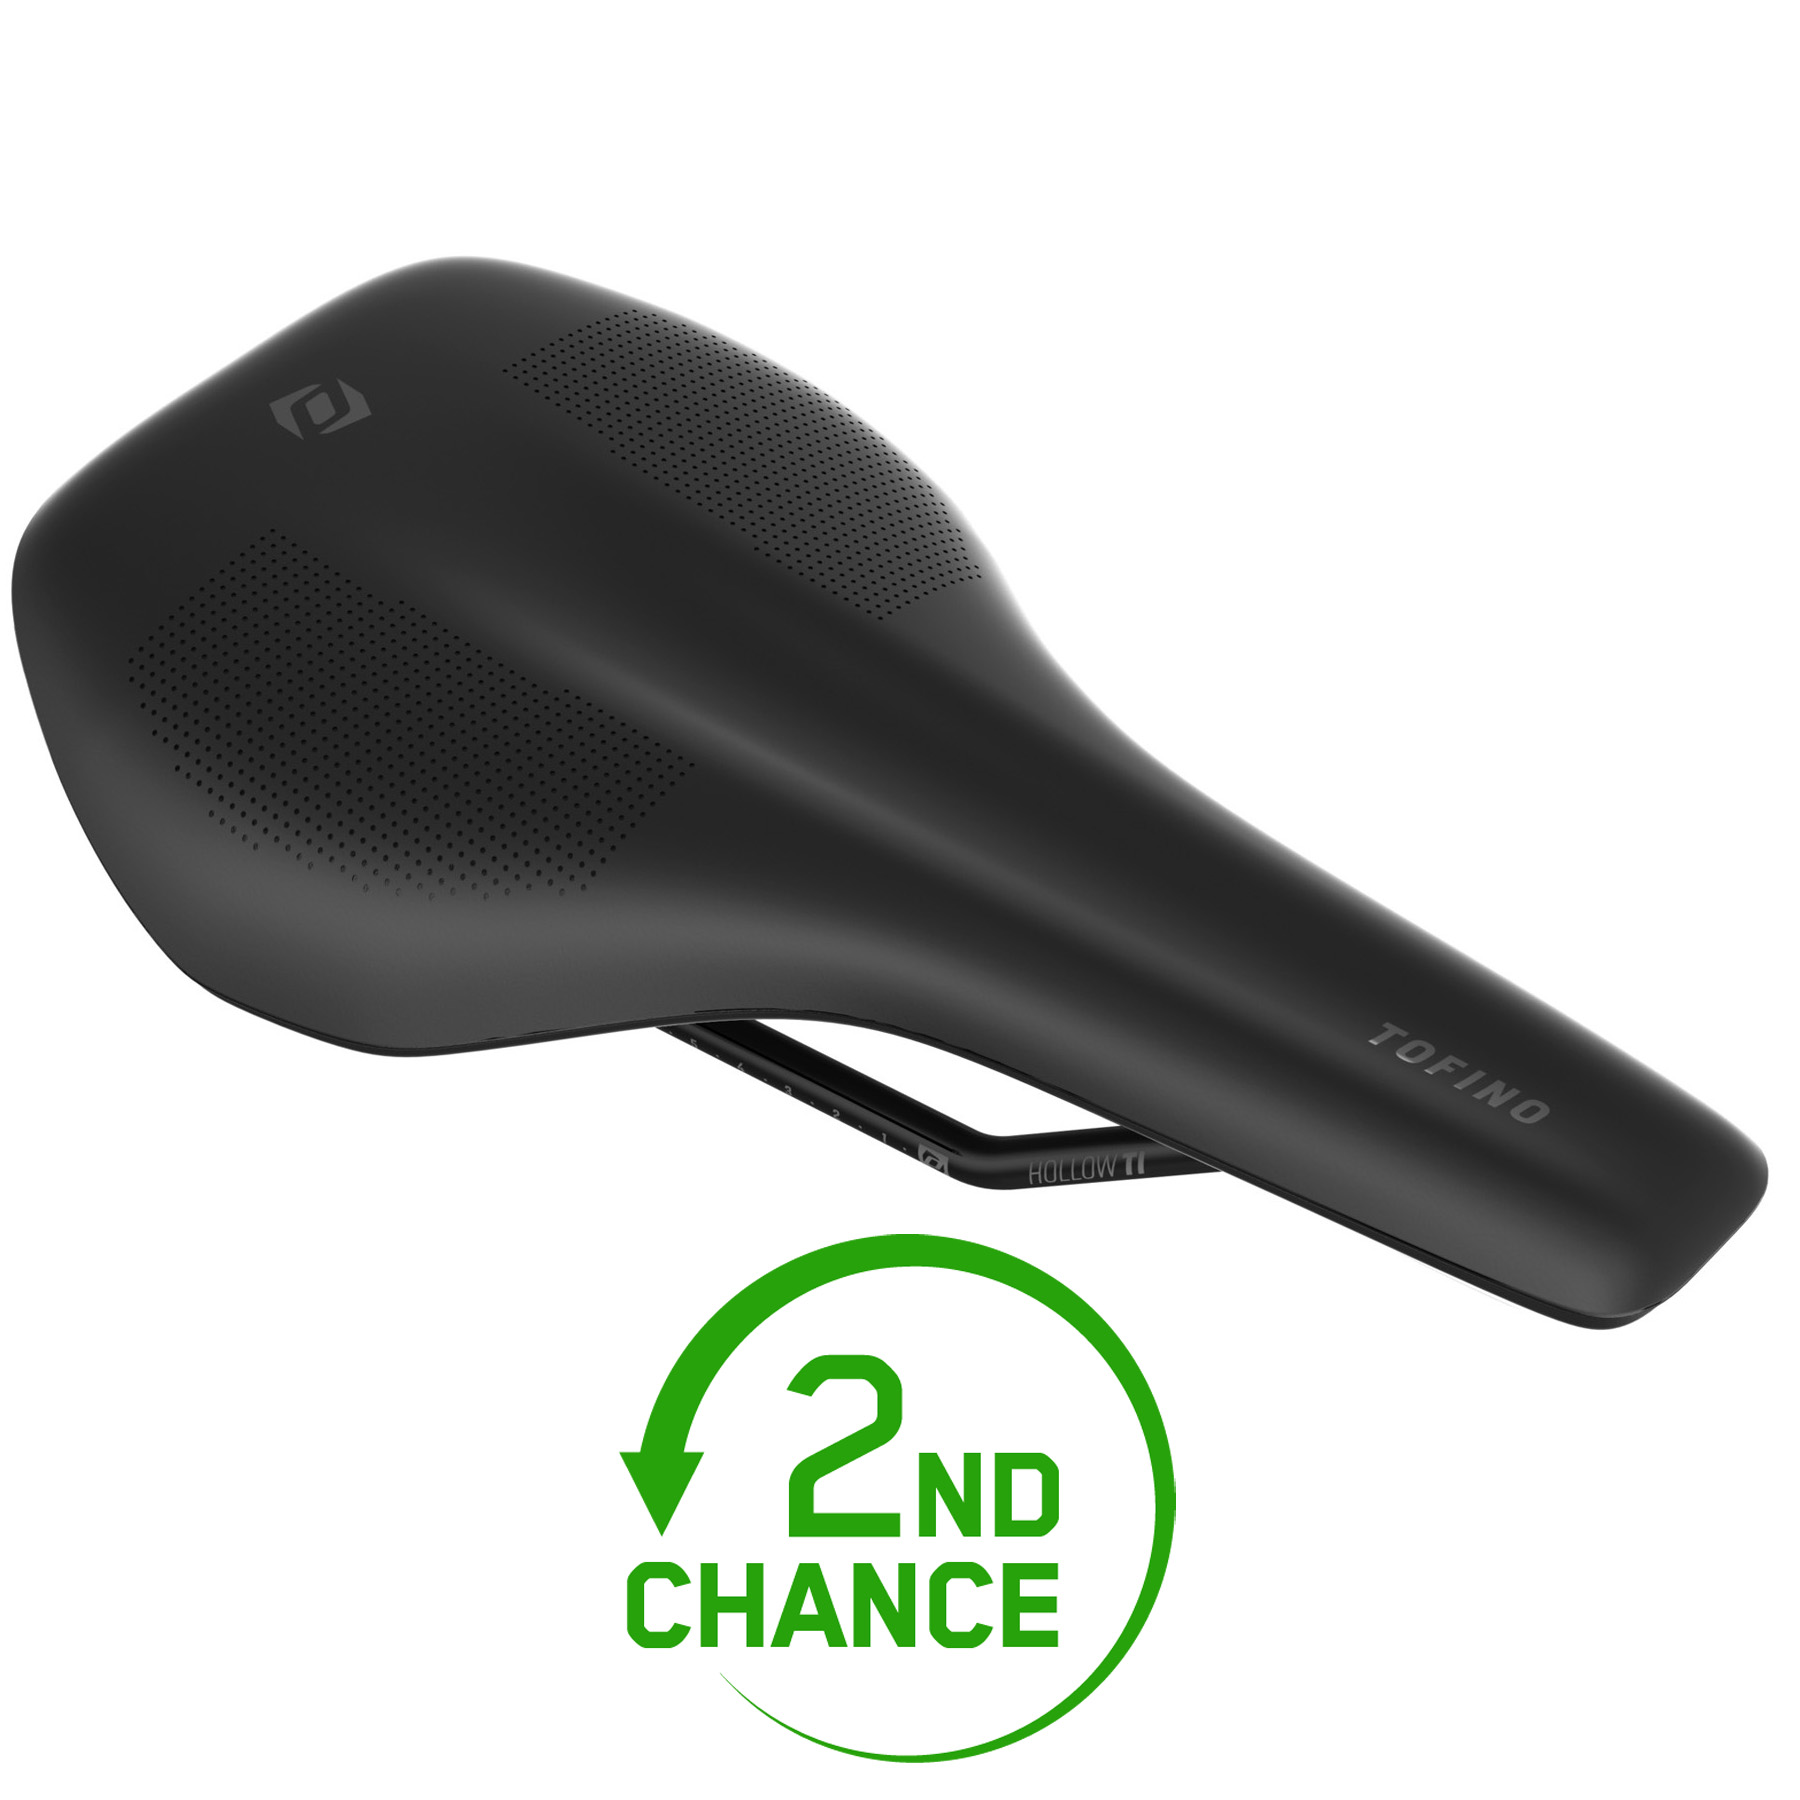 Picture of Syncros Tofino V 1.5 Channel Saddle - black - 2nd Choice